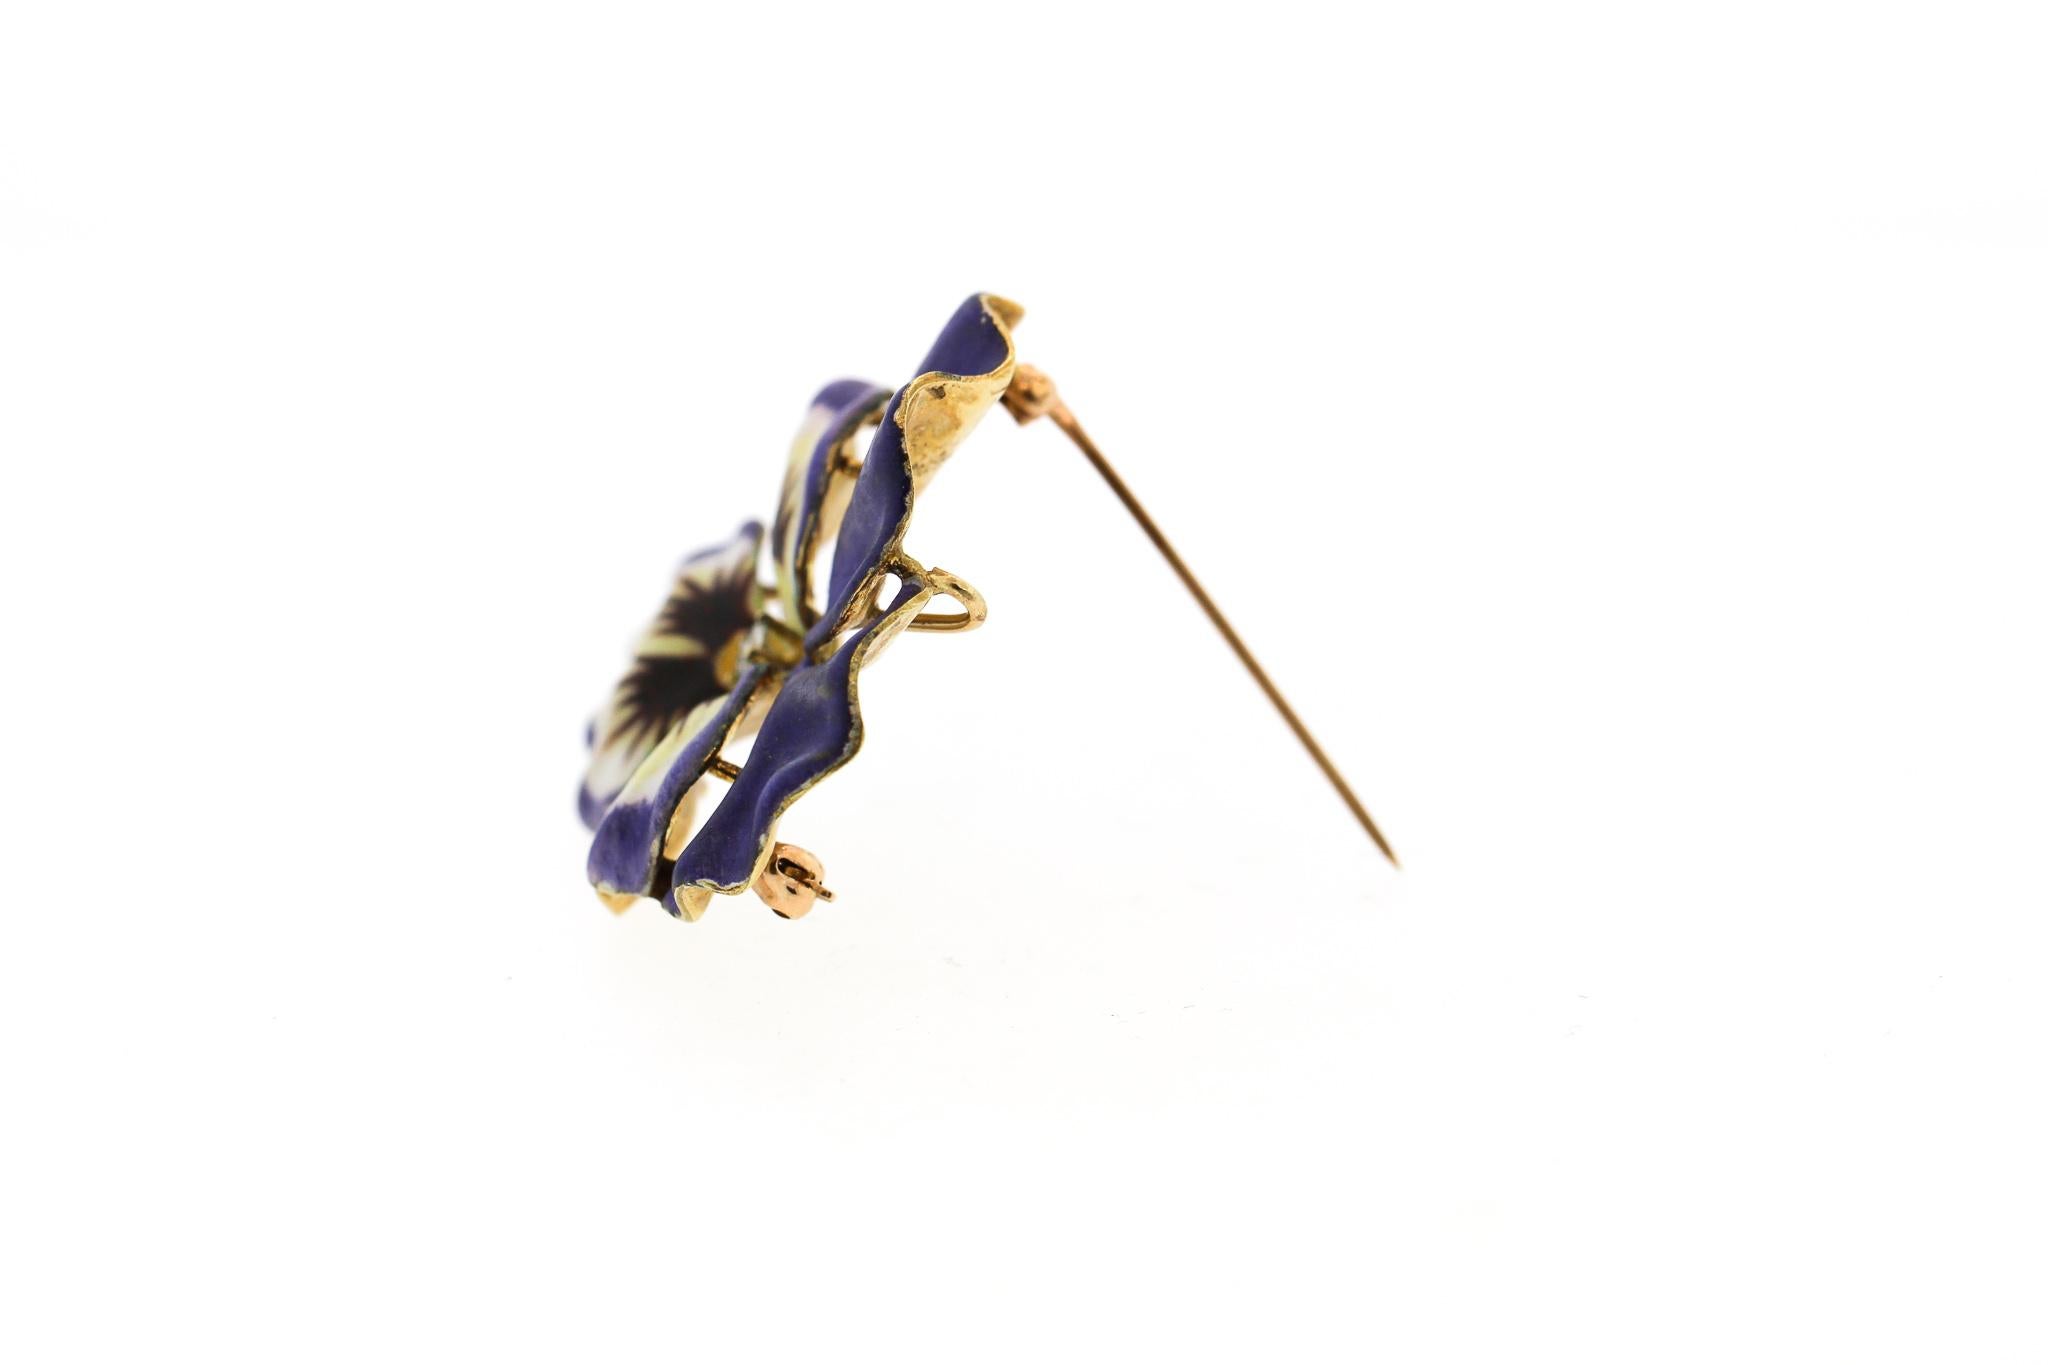 An antique vintage purple enamel pansy brooch made in 14k yellow gold and set with a diamond. The pin likely dates to about 1940. These types of pins were made as early as 1900 in the Art Nouveau era. Many were made in Newark, NJ by goldsmiths using